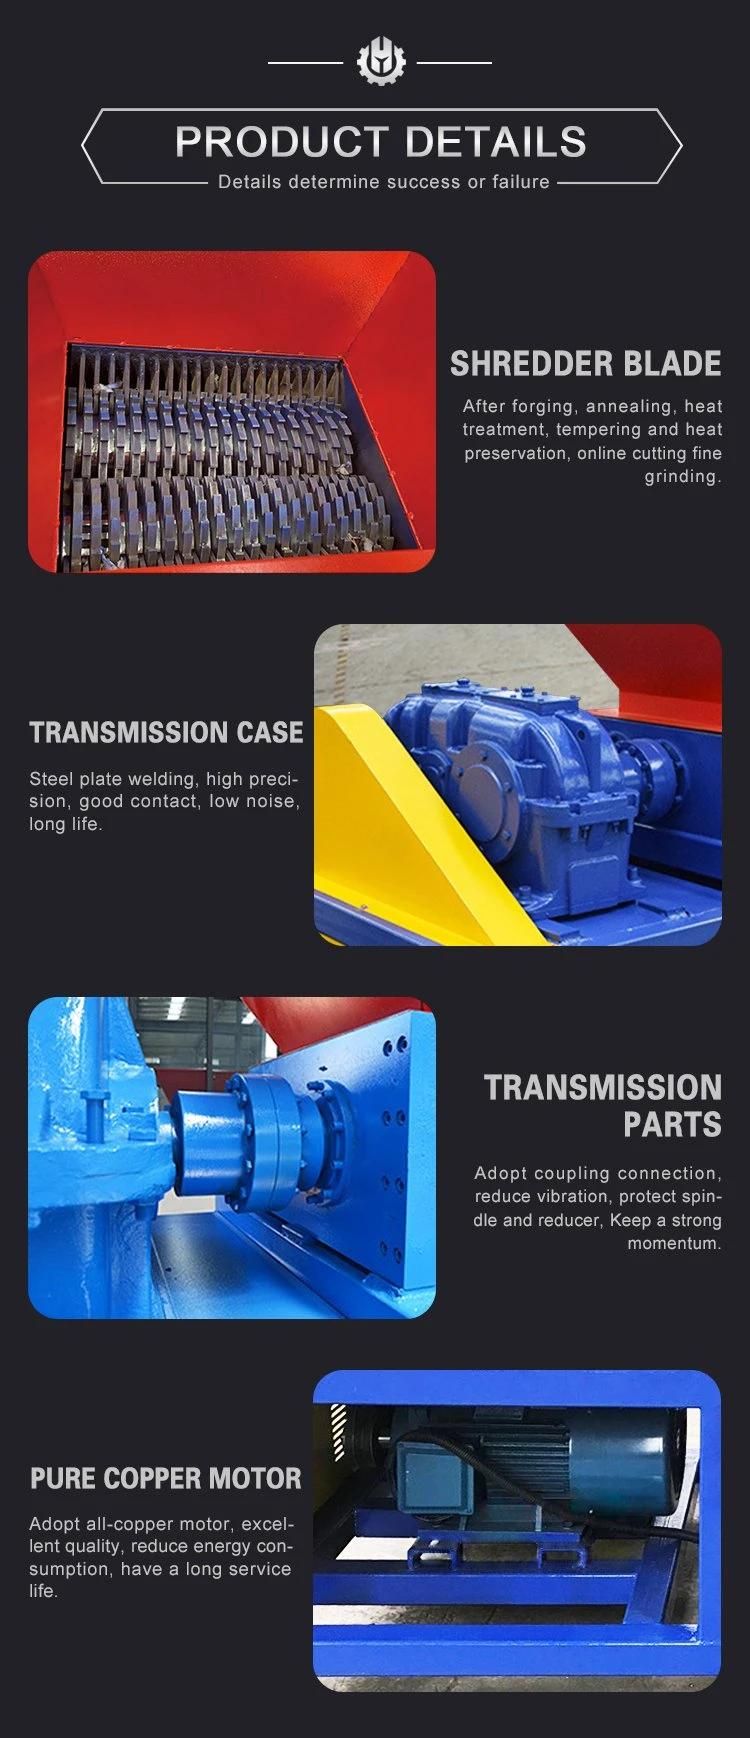 Large Powerful Twin Shaft Shredder for Hard Materials Glass Metal Plastic Crushing and Recycling Machine